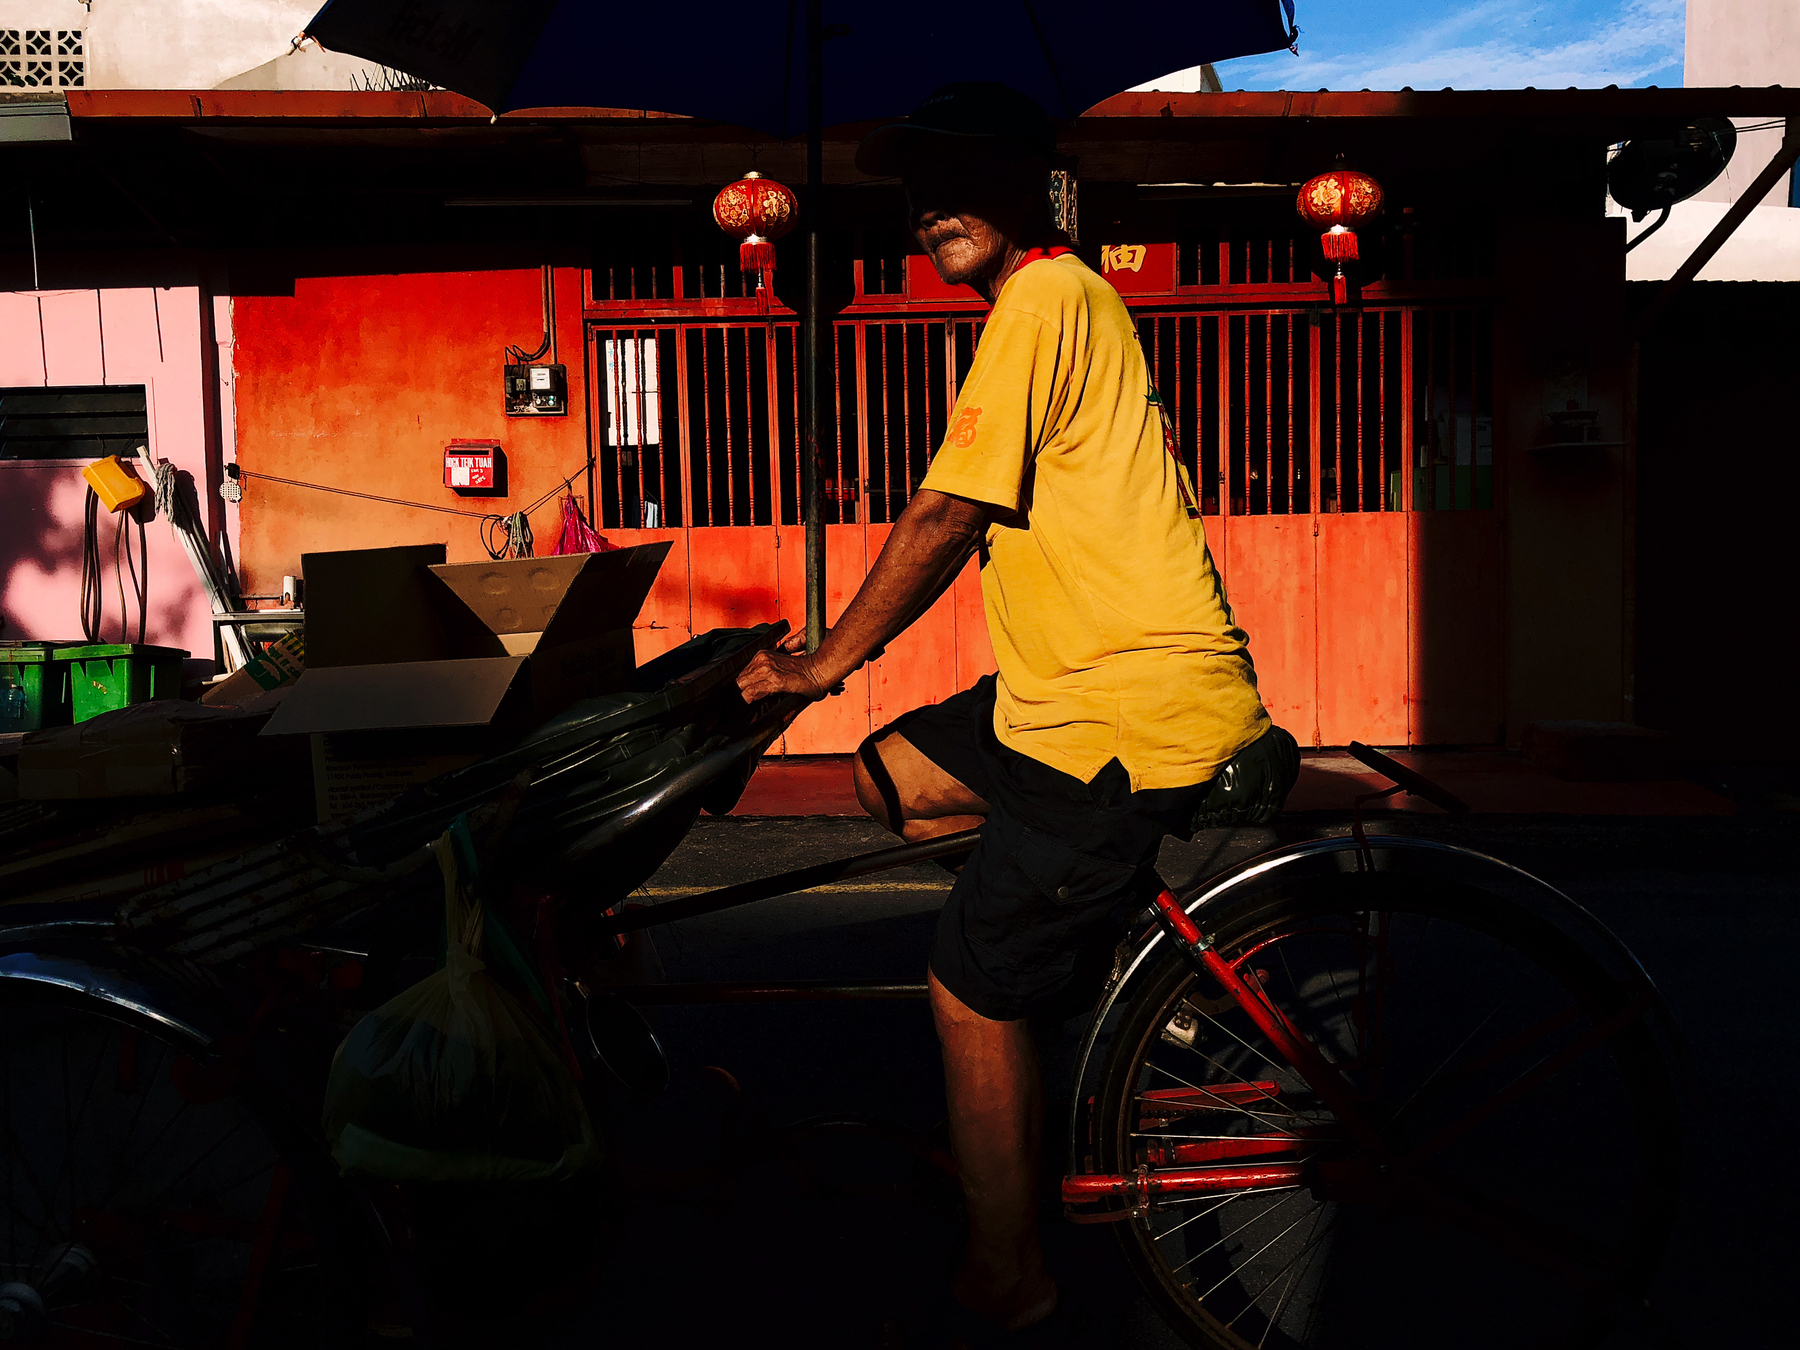 A man slowly cycles in front of us, in a very colorful scene. Yellow shirt, red background, an umbrella casting shade over his face. 